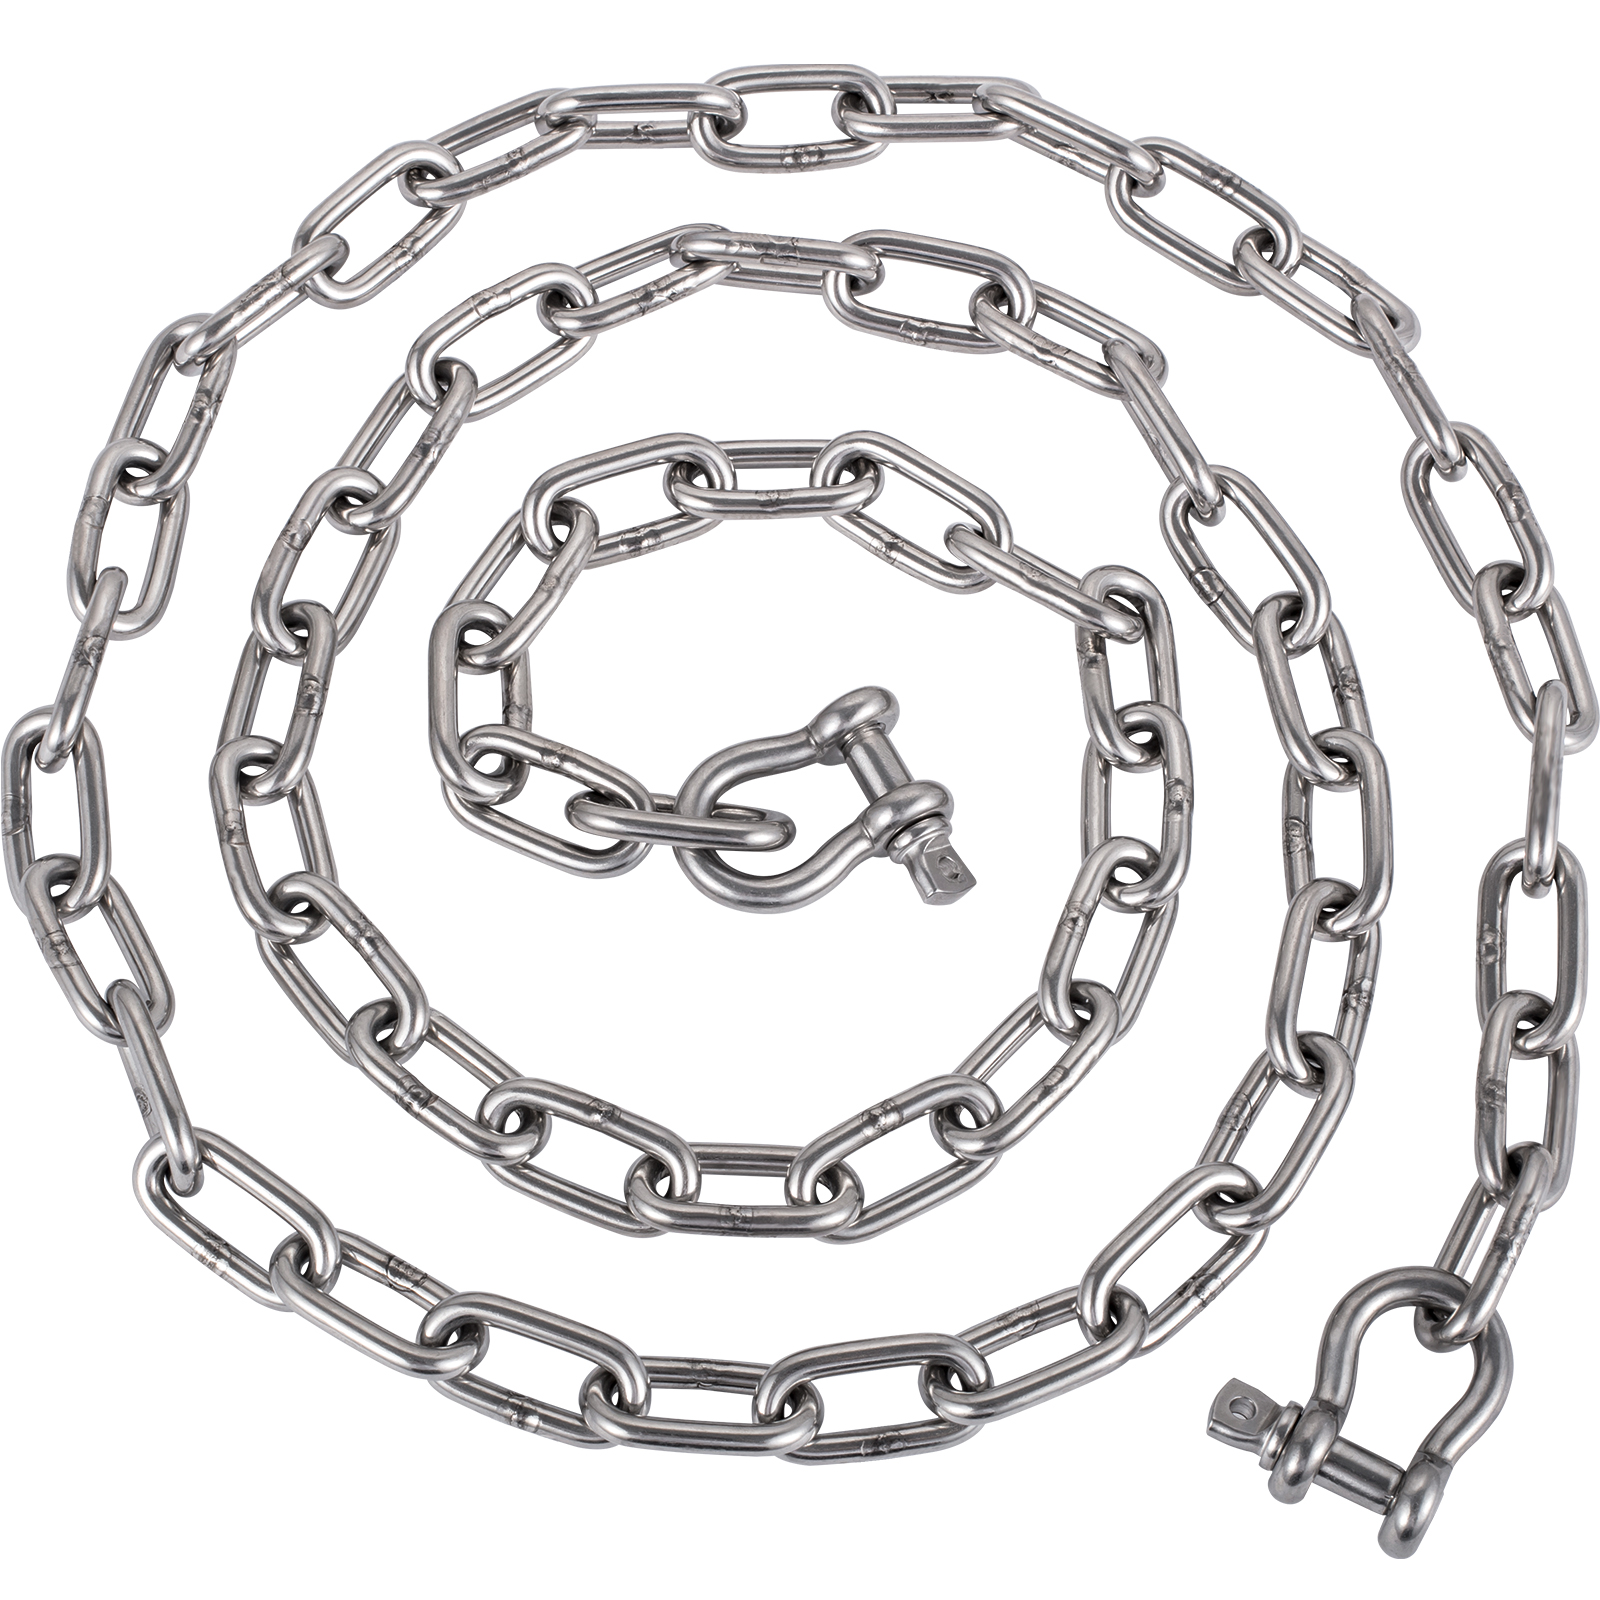 Vevor Boat Anchor Chain Stainless Steel Chain 6 Ft 5/16 In Shackles For Boats от Vevor Many GEOs